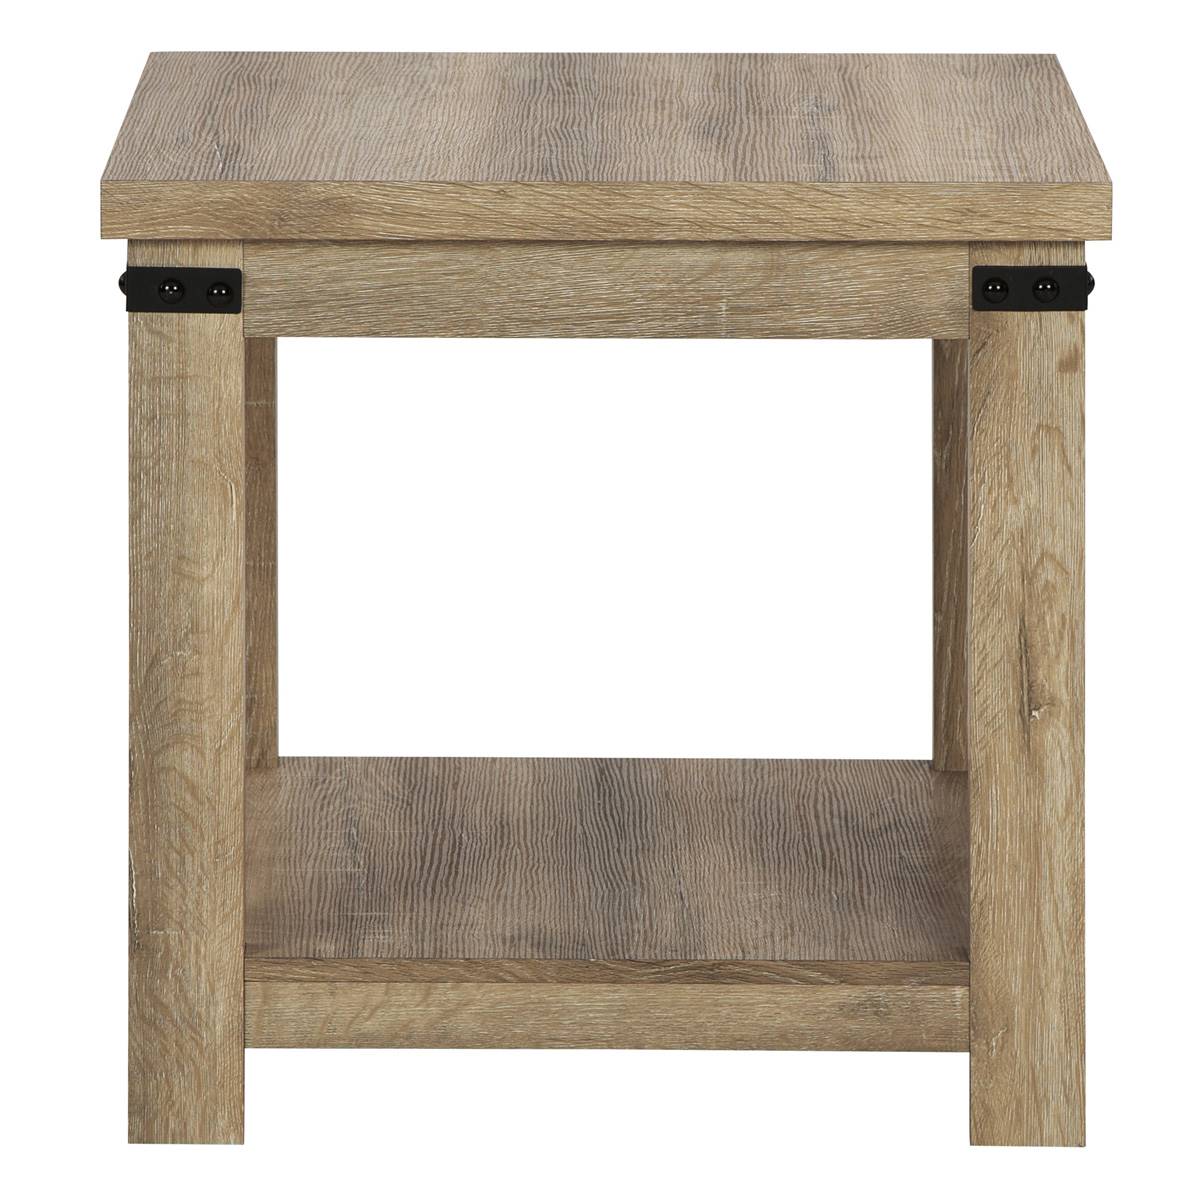 Signature Design By Ashley Calaboro End Table